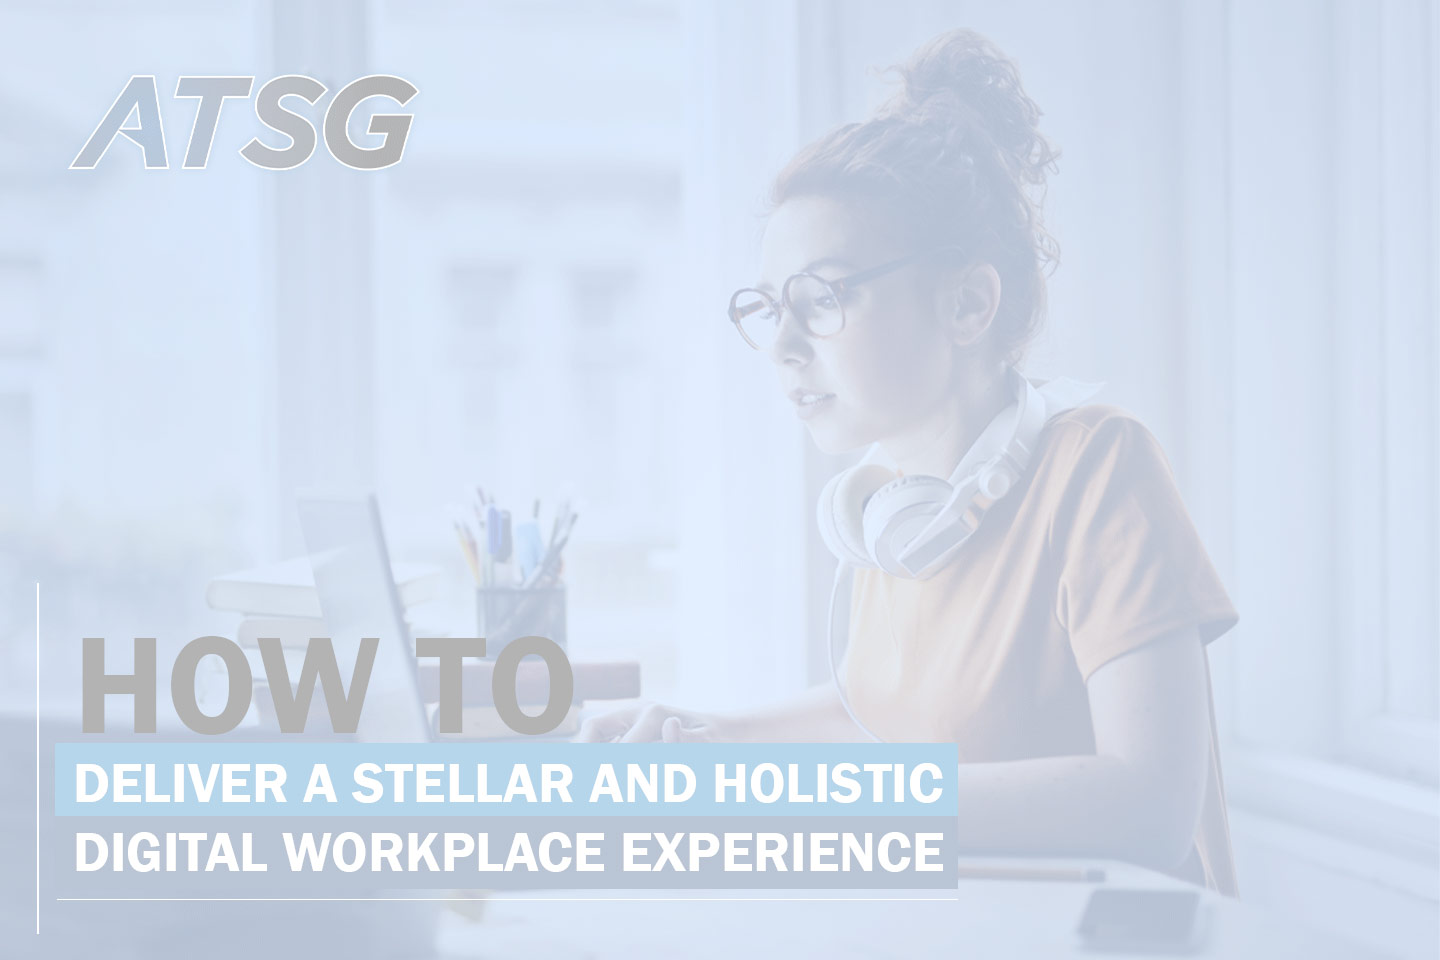 How-to-Deliver-a-Stellar-and-Holistic-Digital-Workplace-Experience-Feature